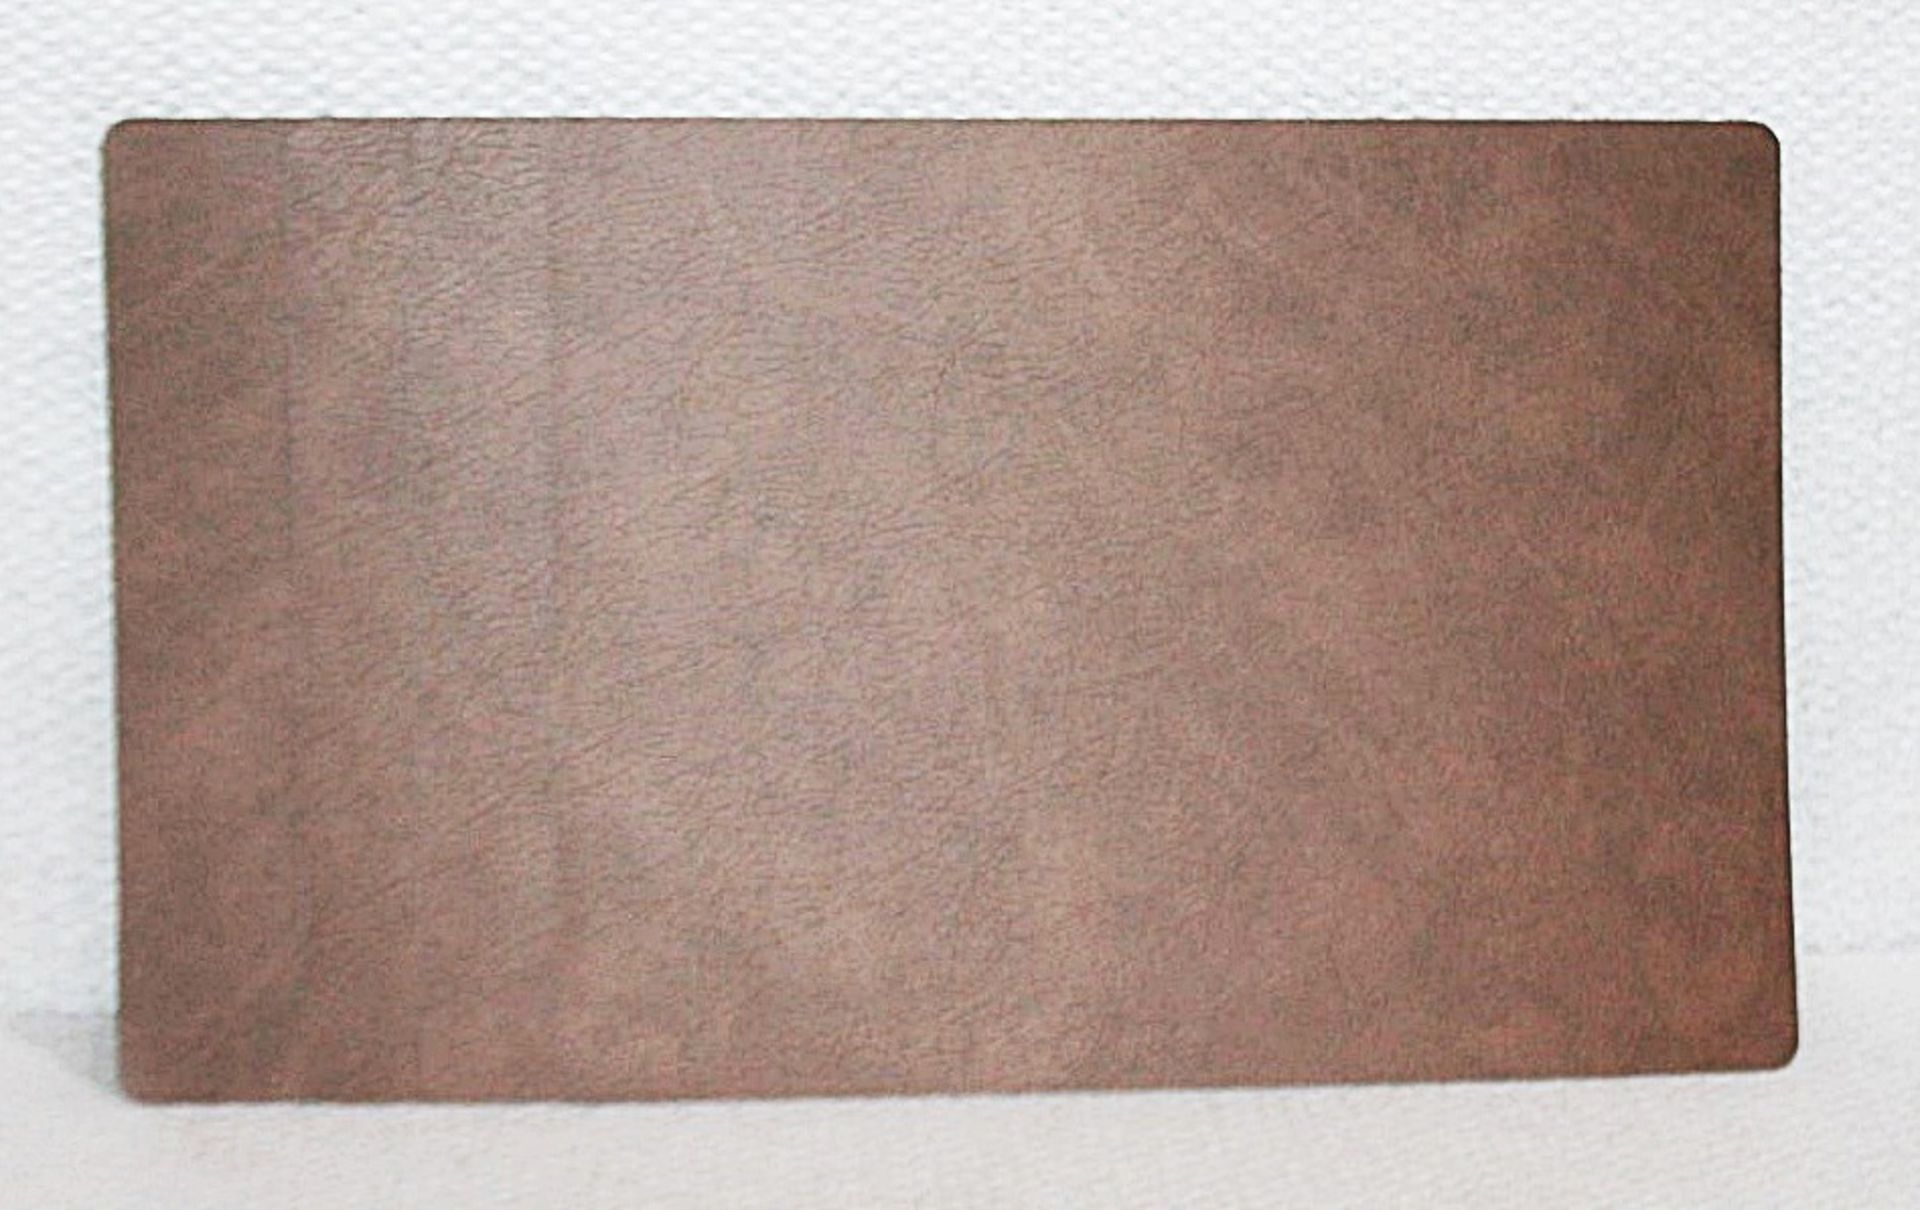 Set Of 4 x LINDDNA 'CLOUD' Recycled Leather Double-sided Placemats In Black & Brown - RRP £109.00 - Image 9 of 9